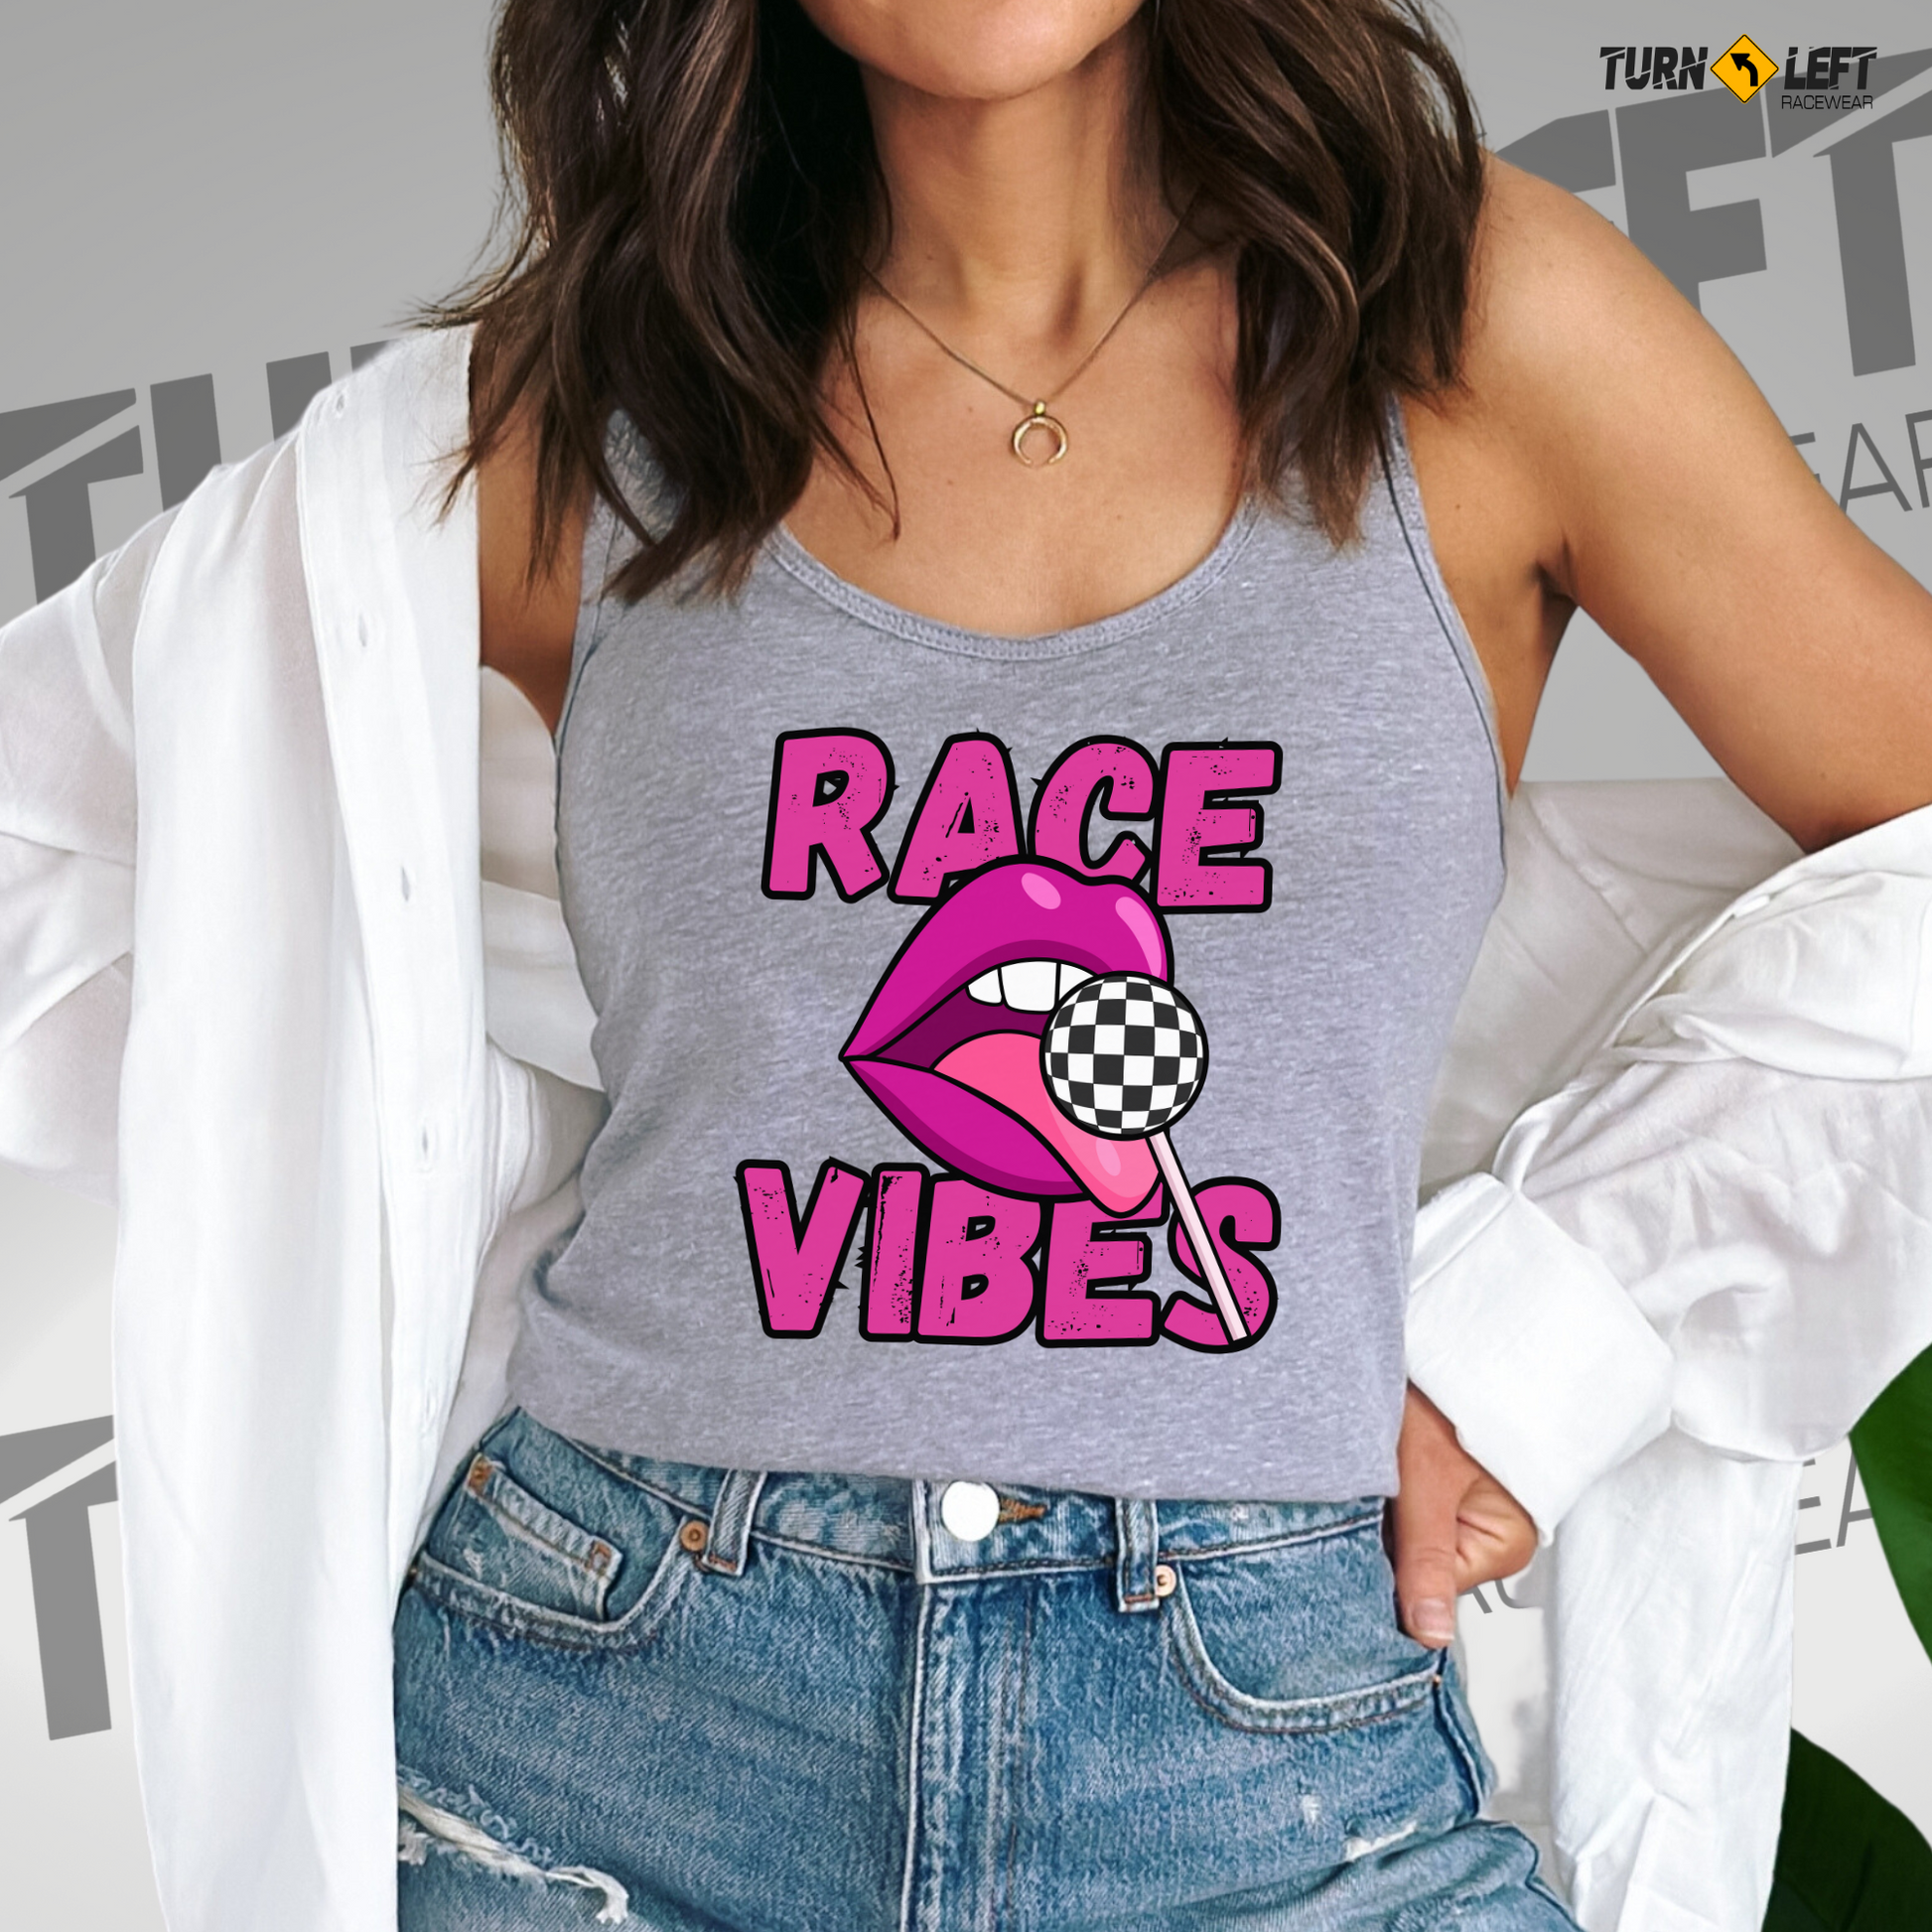 Women's checker flag racing tank tops, Race Vibes Tanks, Racing quote shirts for women. Racing lips race mouth checker flag candy lollypop graphic tops. 